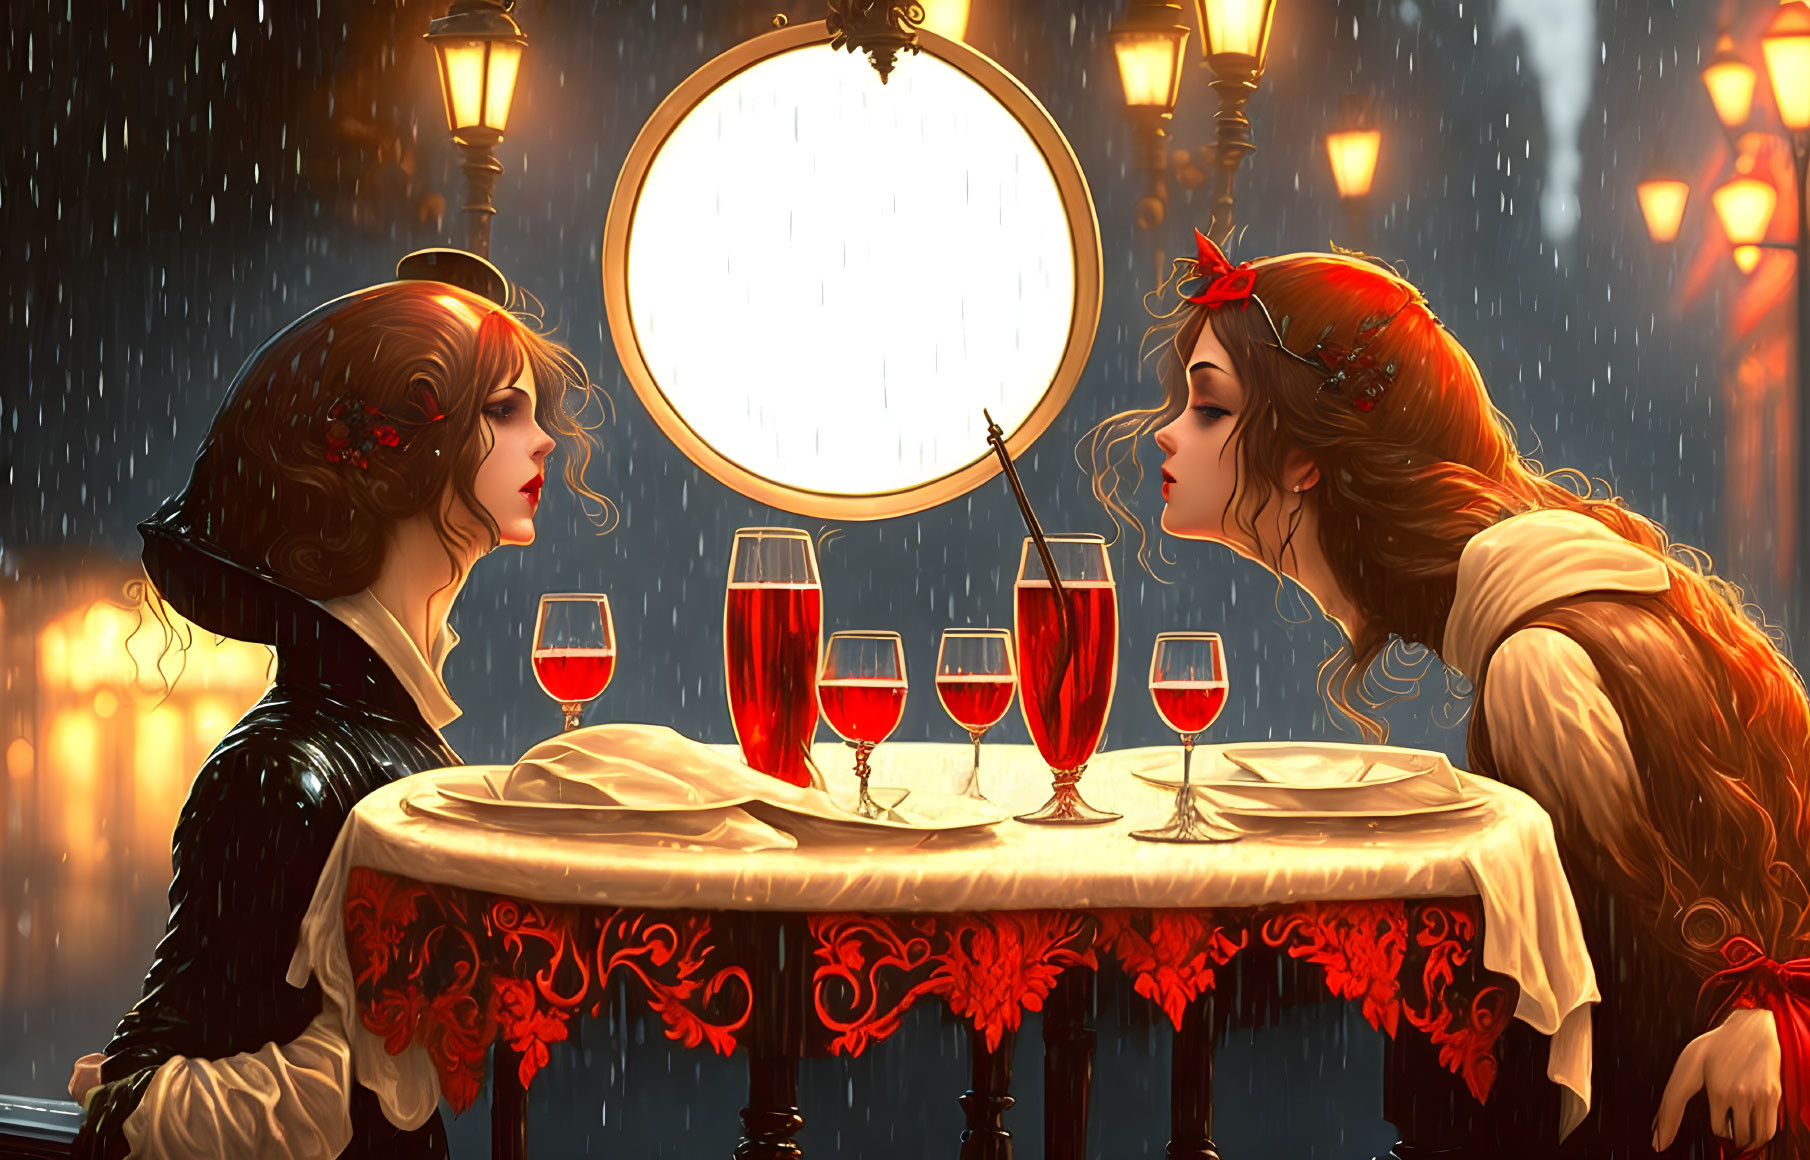 Two women enjoying red wine at outdoor table in rain and streetlight glow.